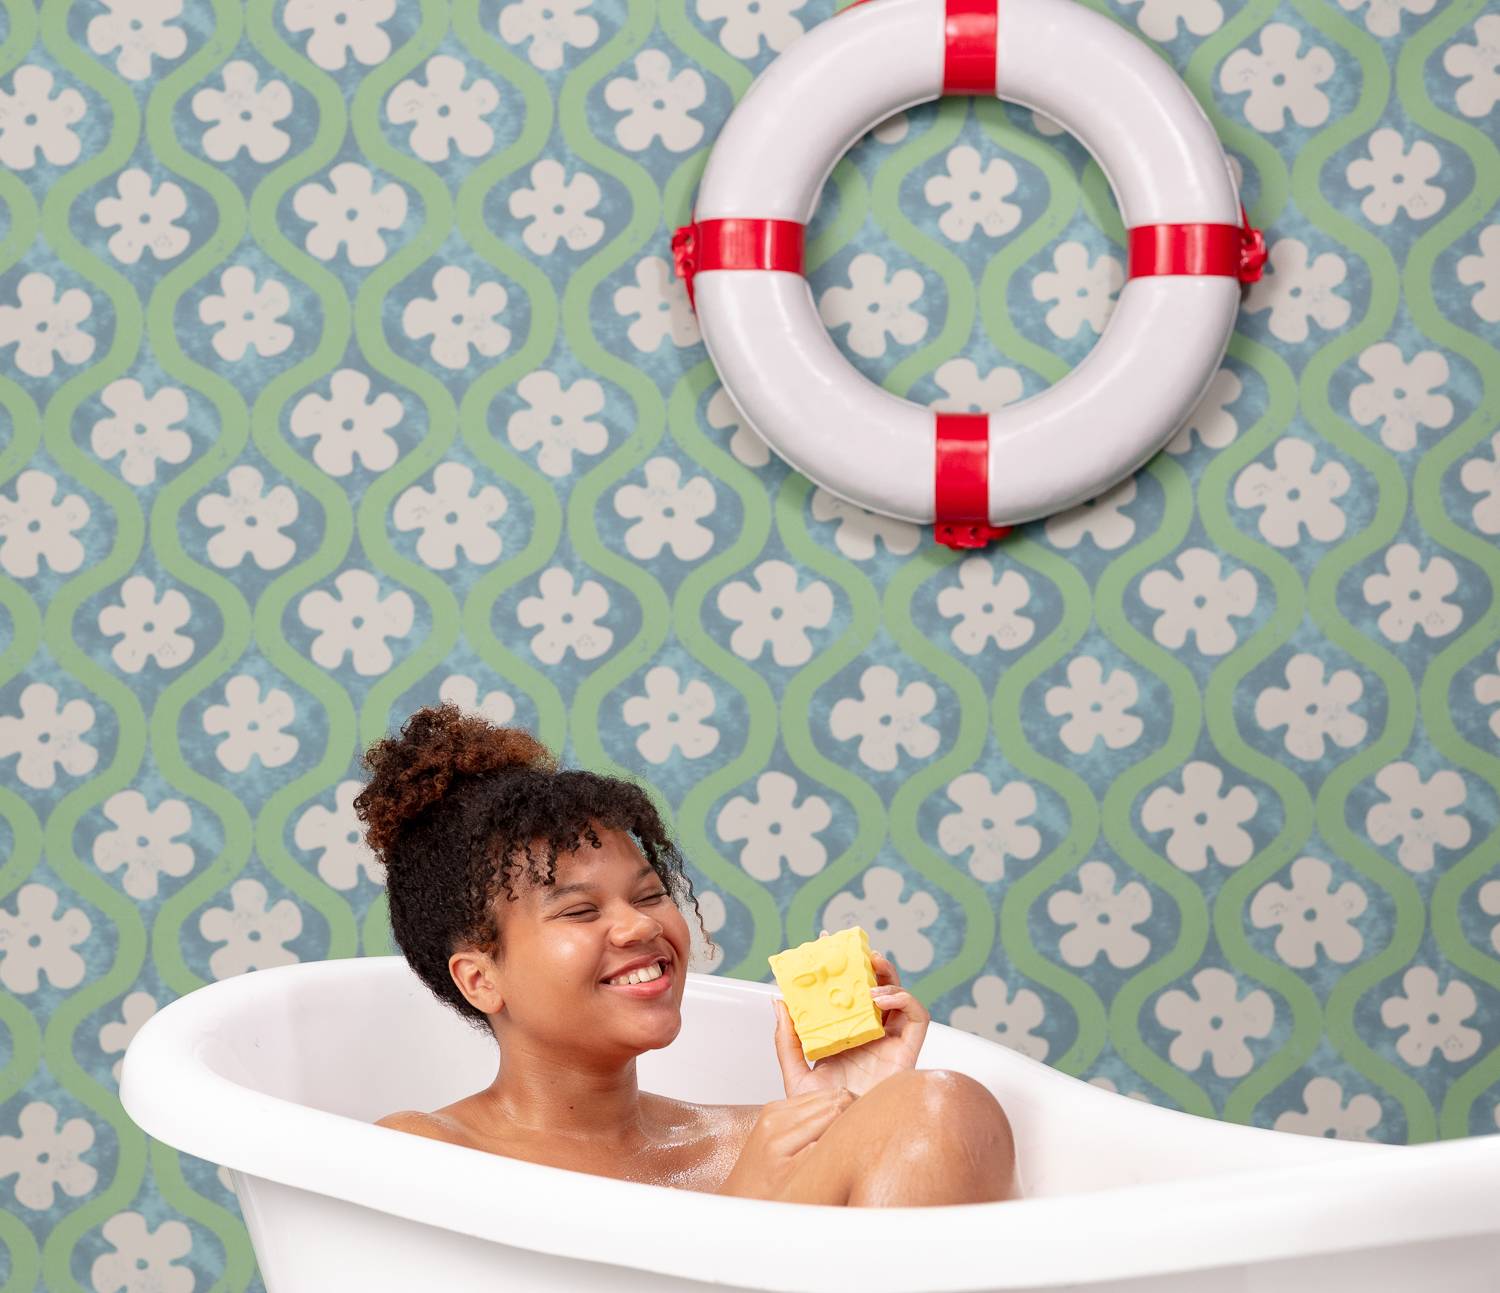 Model is in the bath in a fun, nautical-themed bathroom. They are smiling as they hold the product.